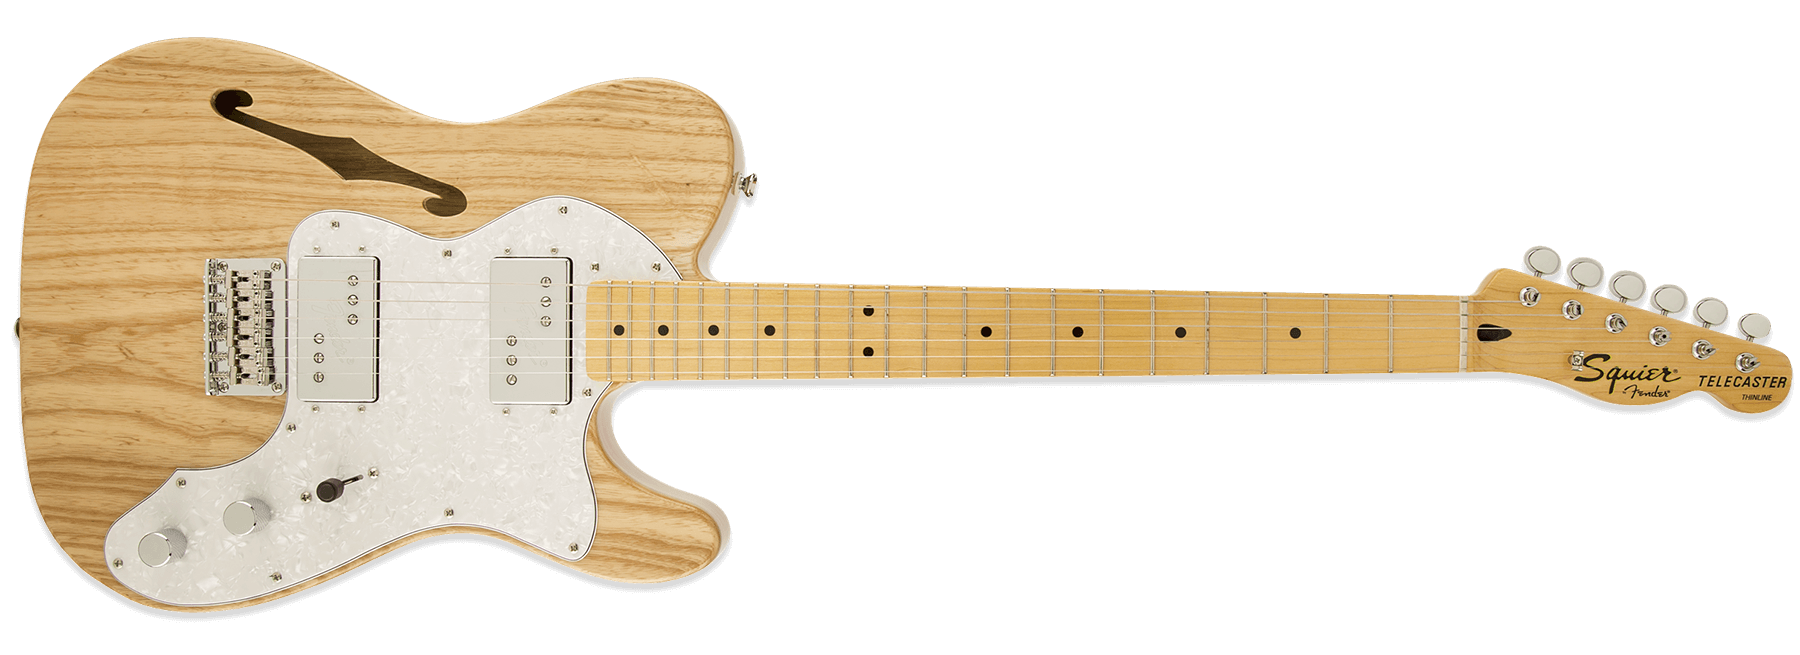 Squier Vintage Modified '72 Telecaster Thinline Natural